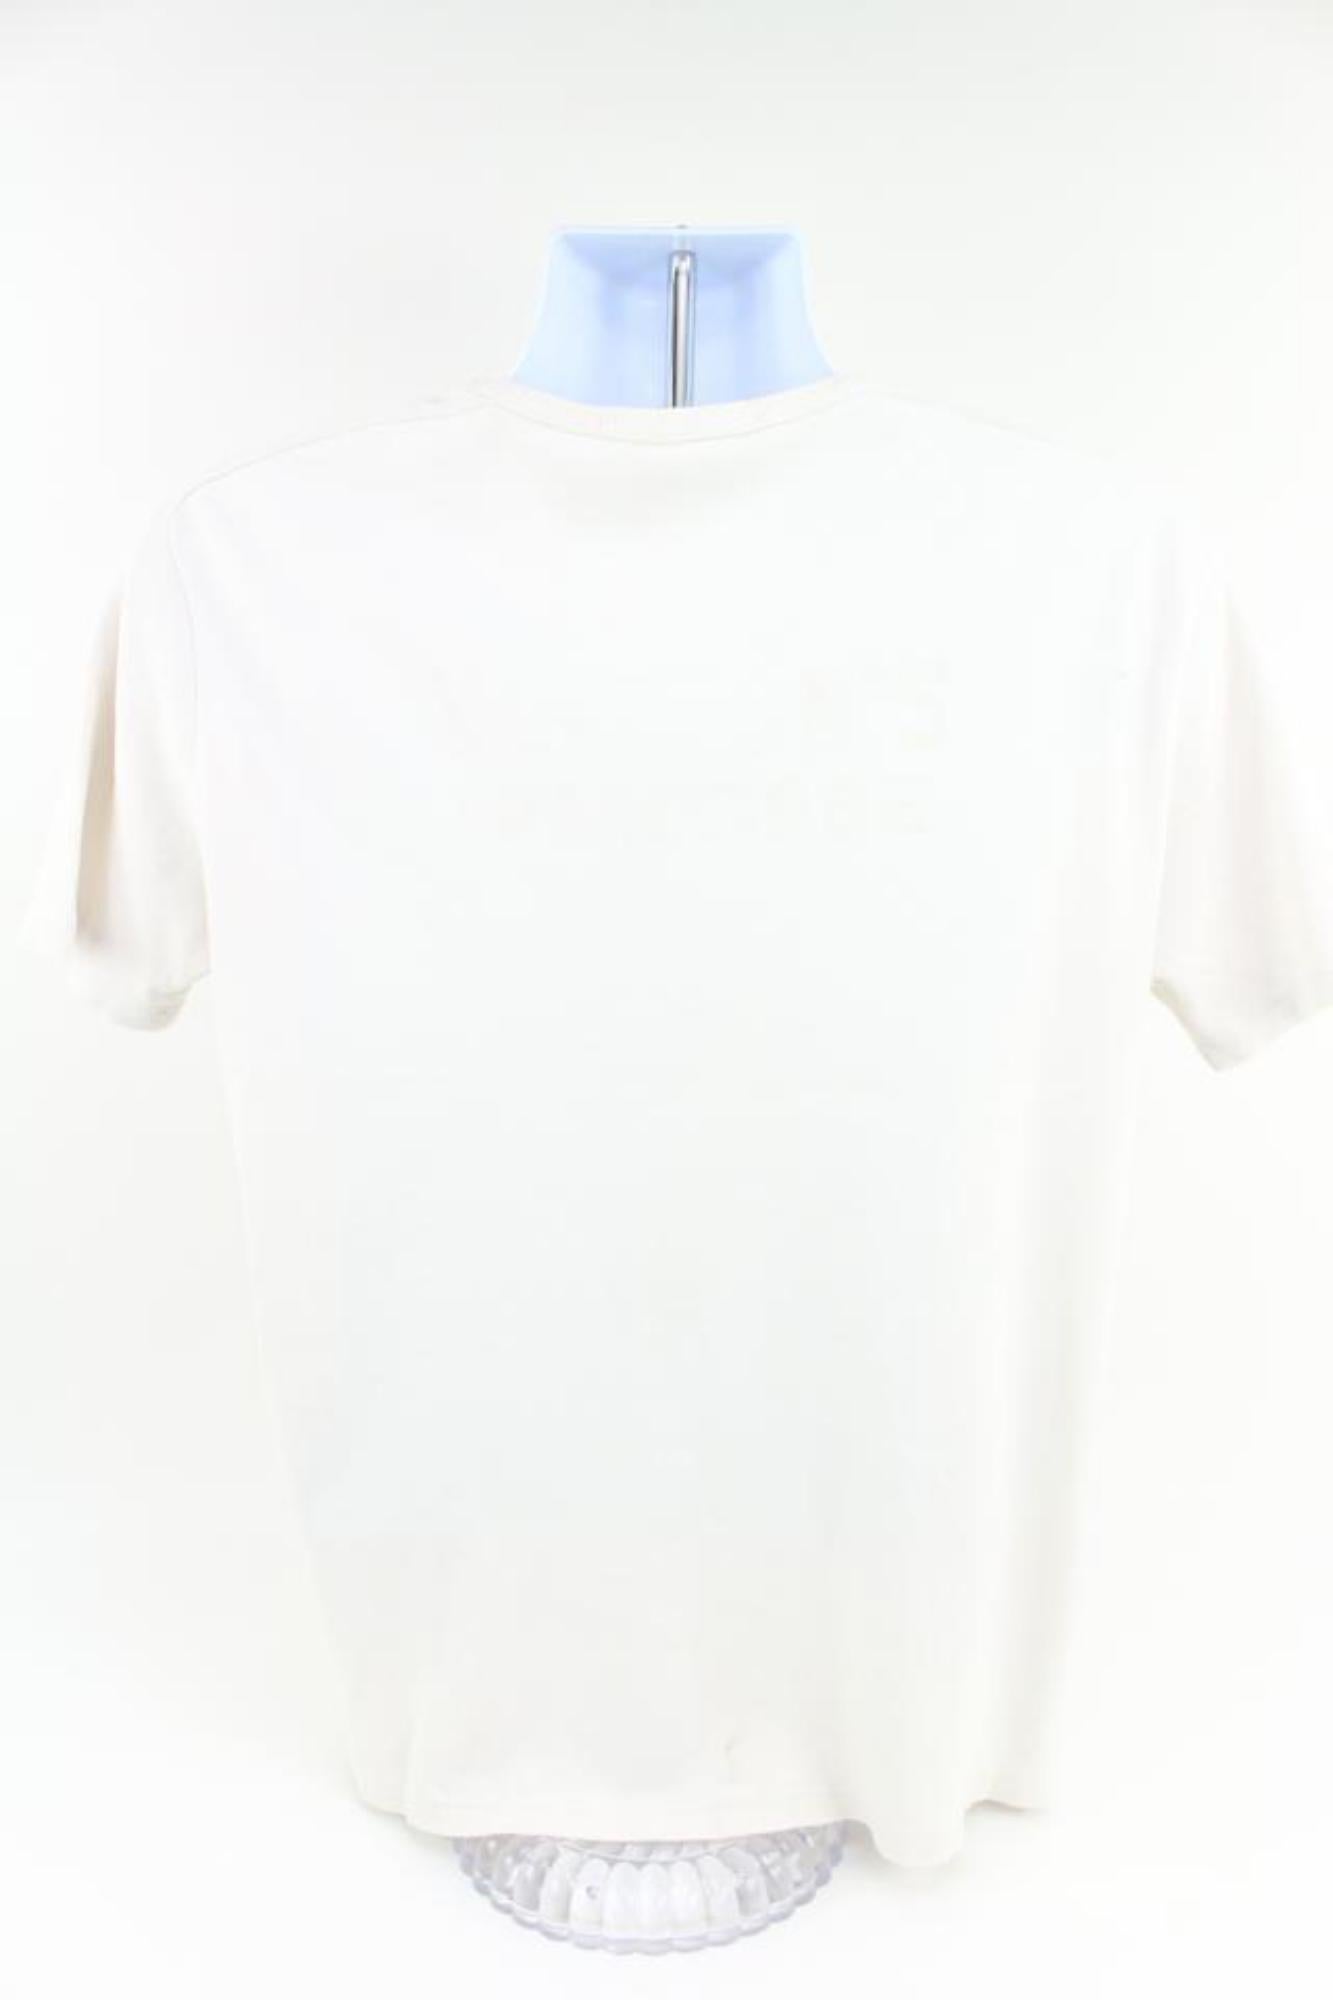 Louis Vuitton Men's Medium White Wardrobe Jersey Sleeve T-Shirt 15lv34s In Fair Condition For Sale In Dix hills, NY